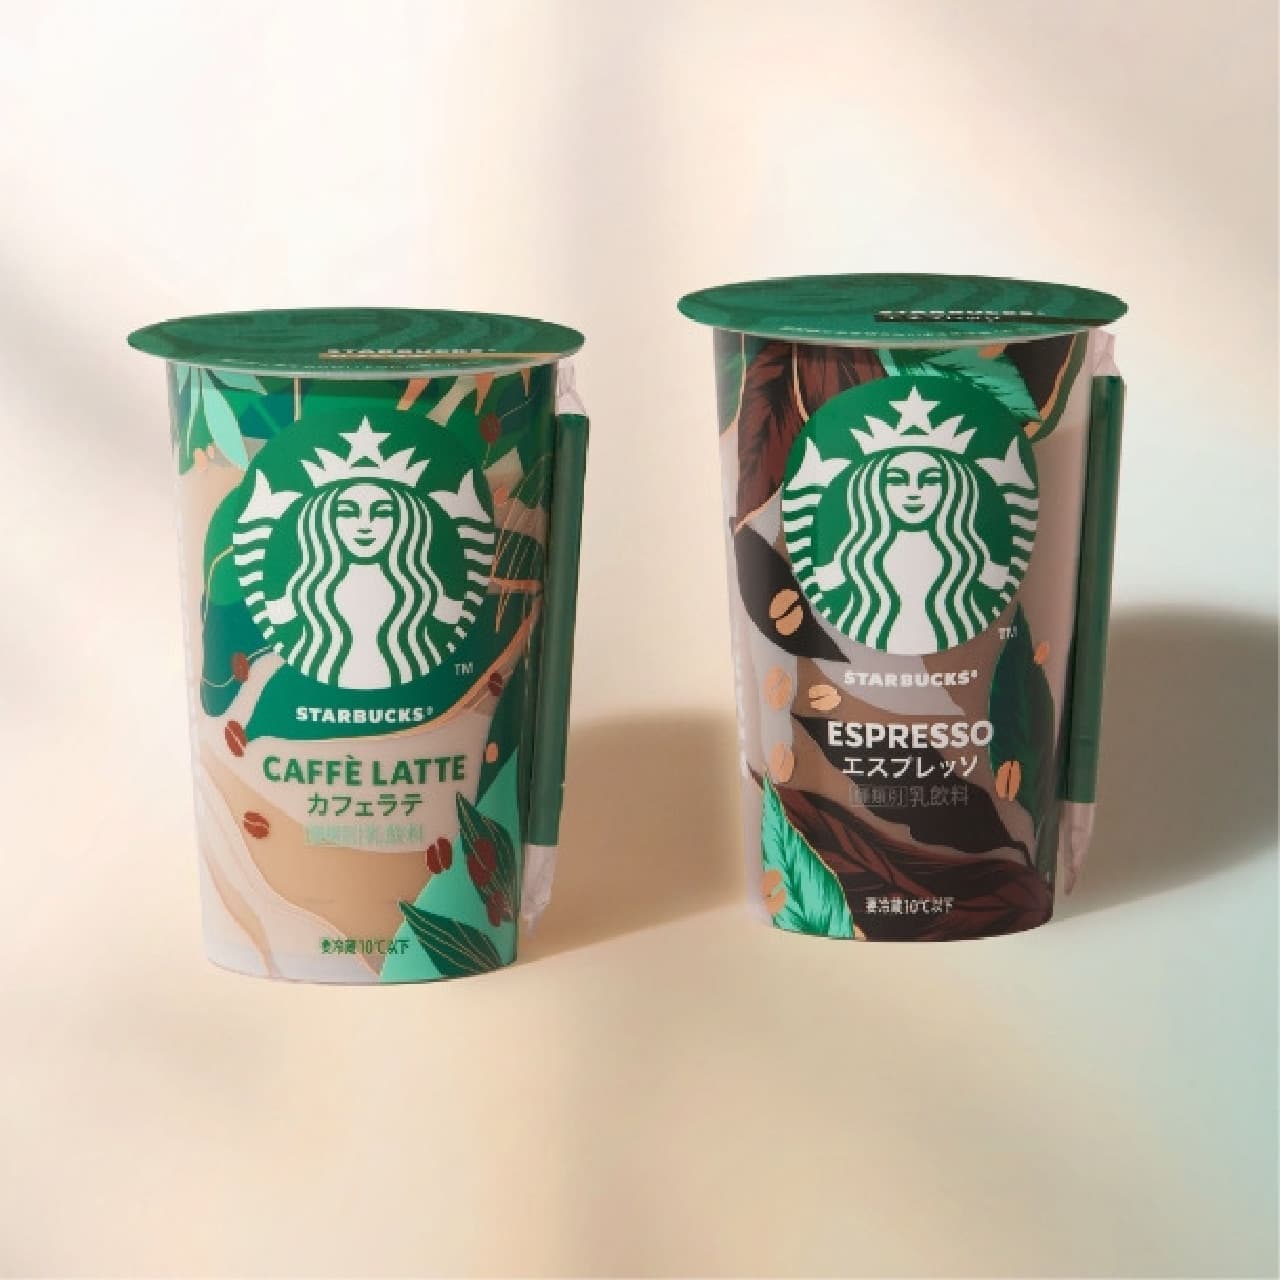 Summary of Starbucks drink information available at convenience stores nationwide.